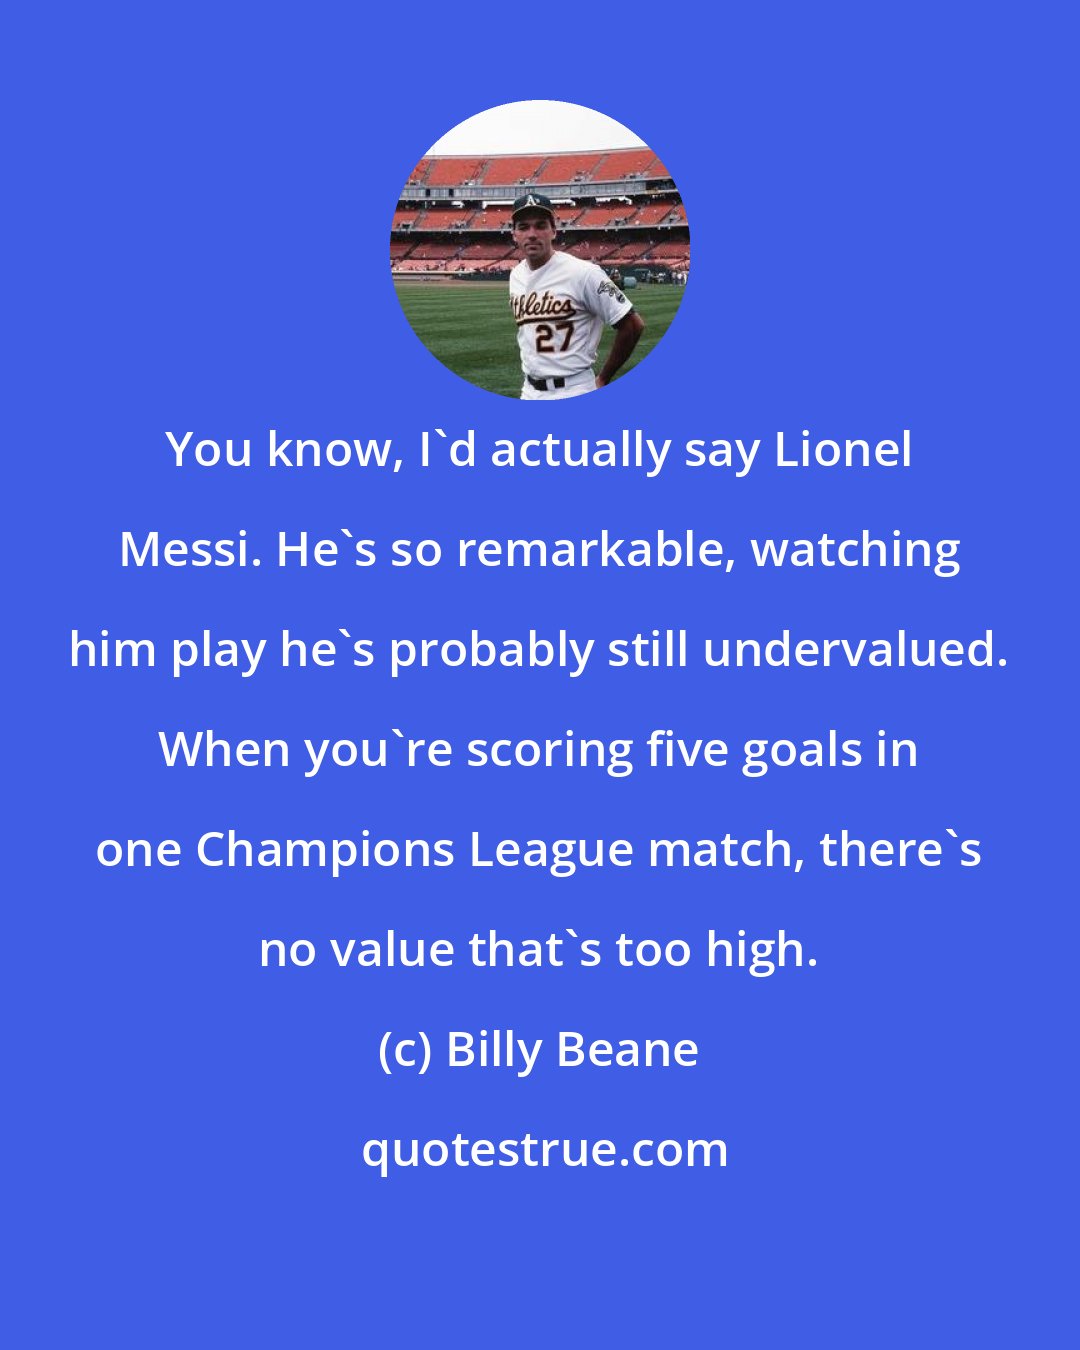 Billy Beane: You know, I'd actually say Lionel Messi. He's so remarkable, watching him play he's probably still undervalued. When you're scoring five goals in one Champions League match, there's no value that's too high.